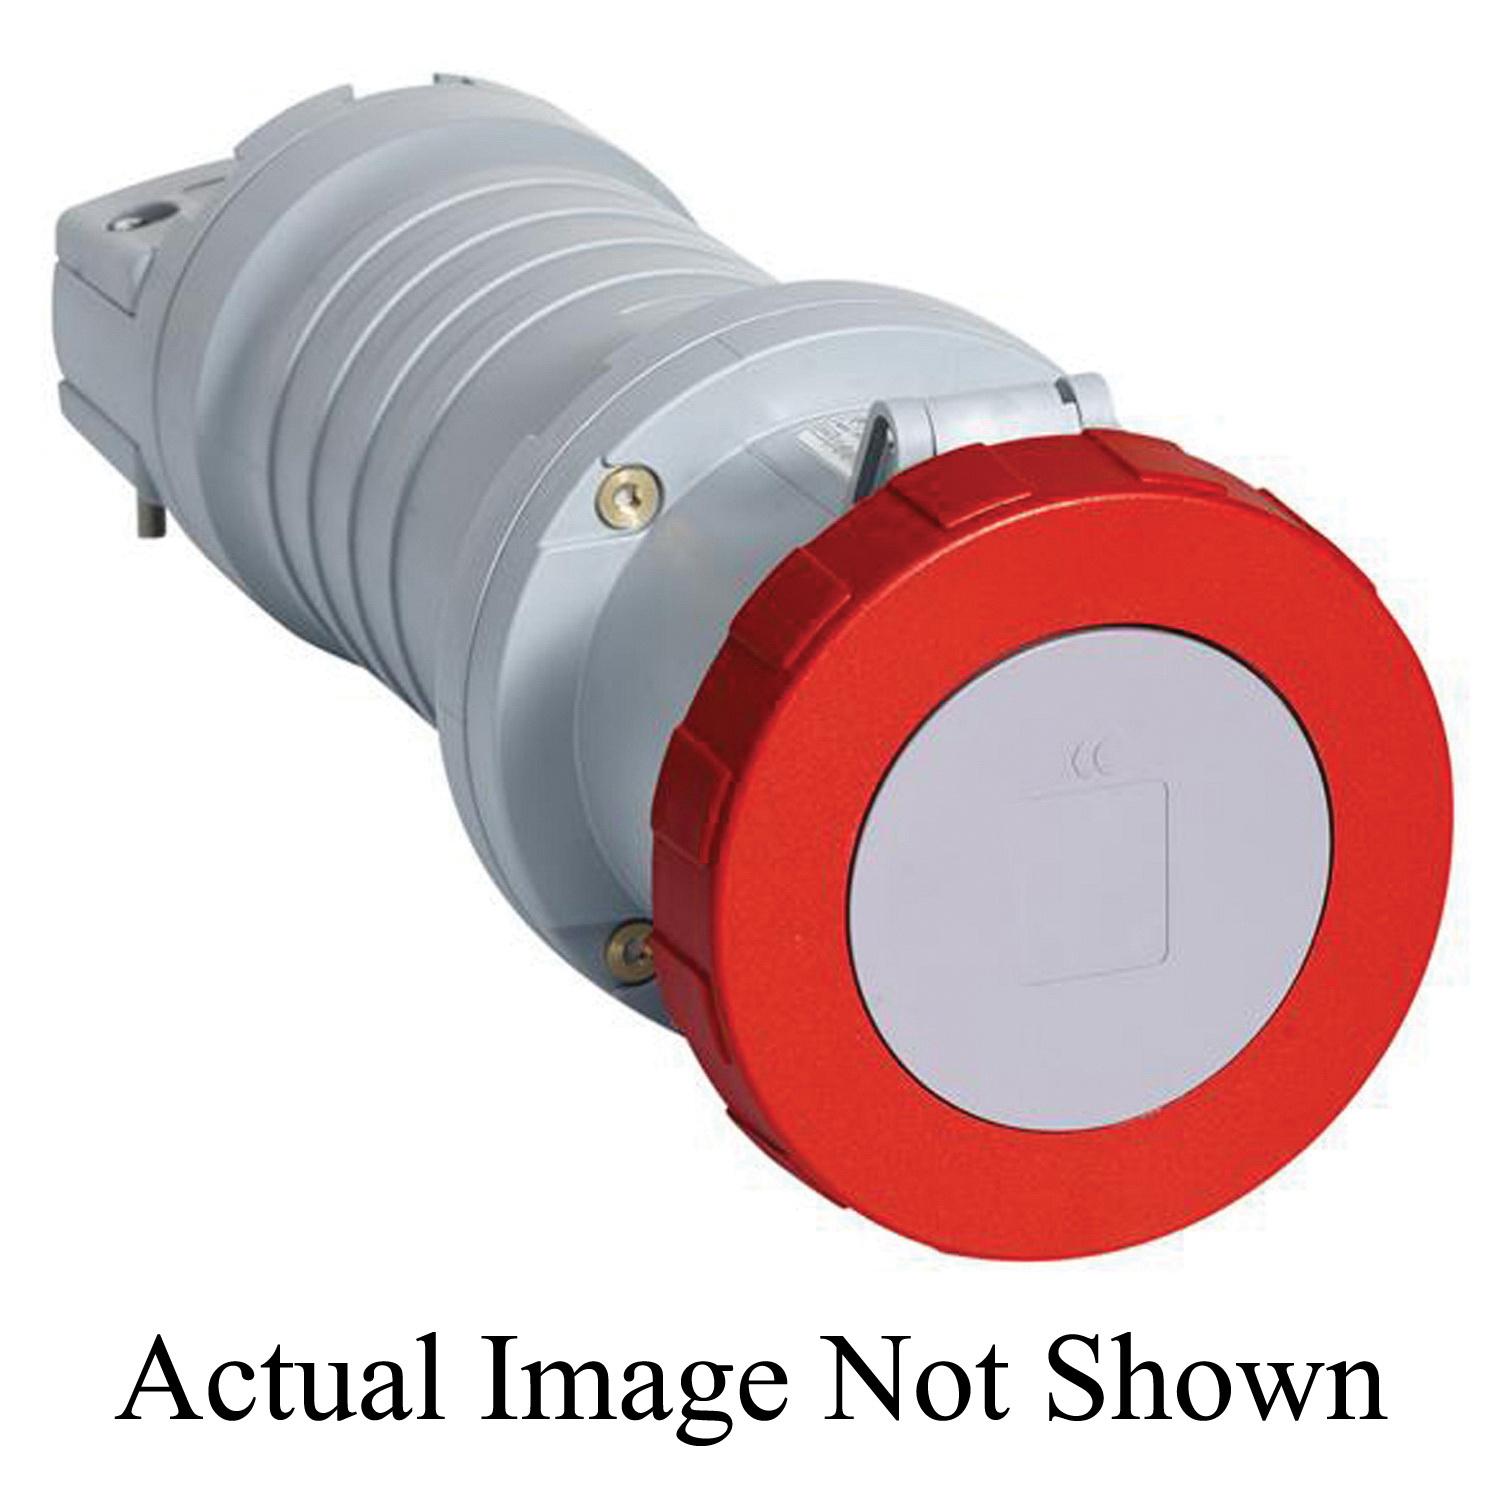 ABB ABB460C9W Pin and Sleeve Connector